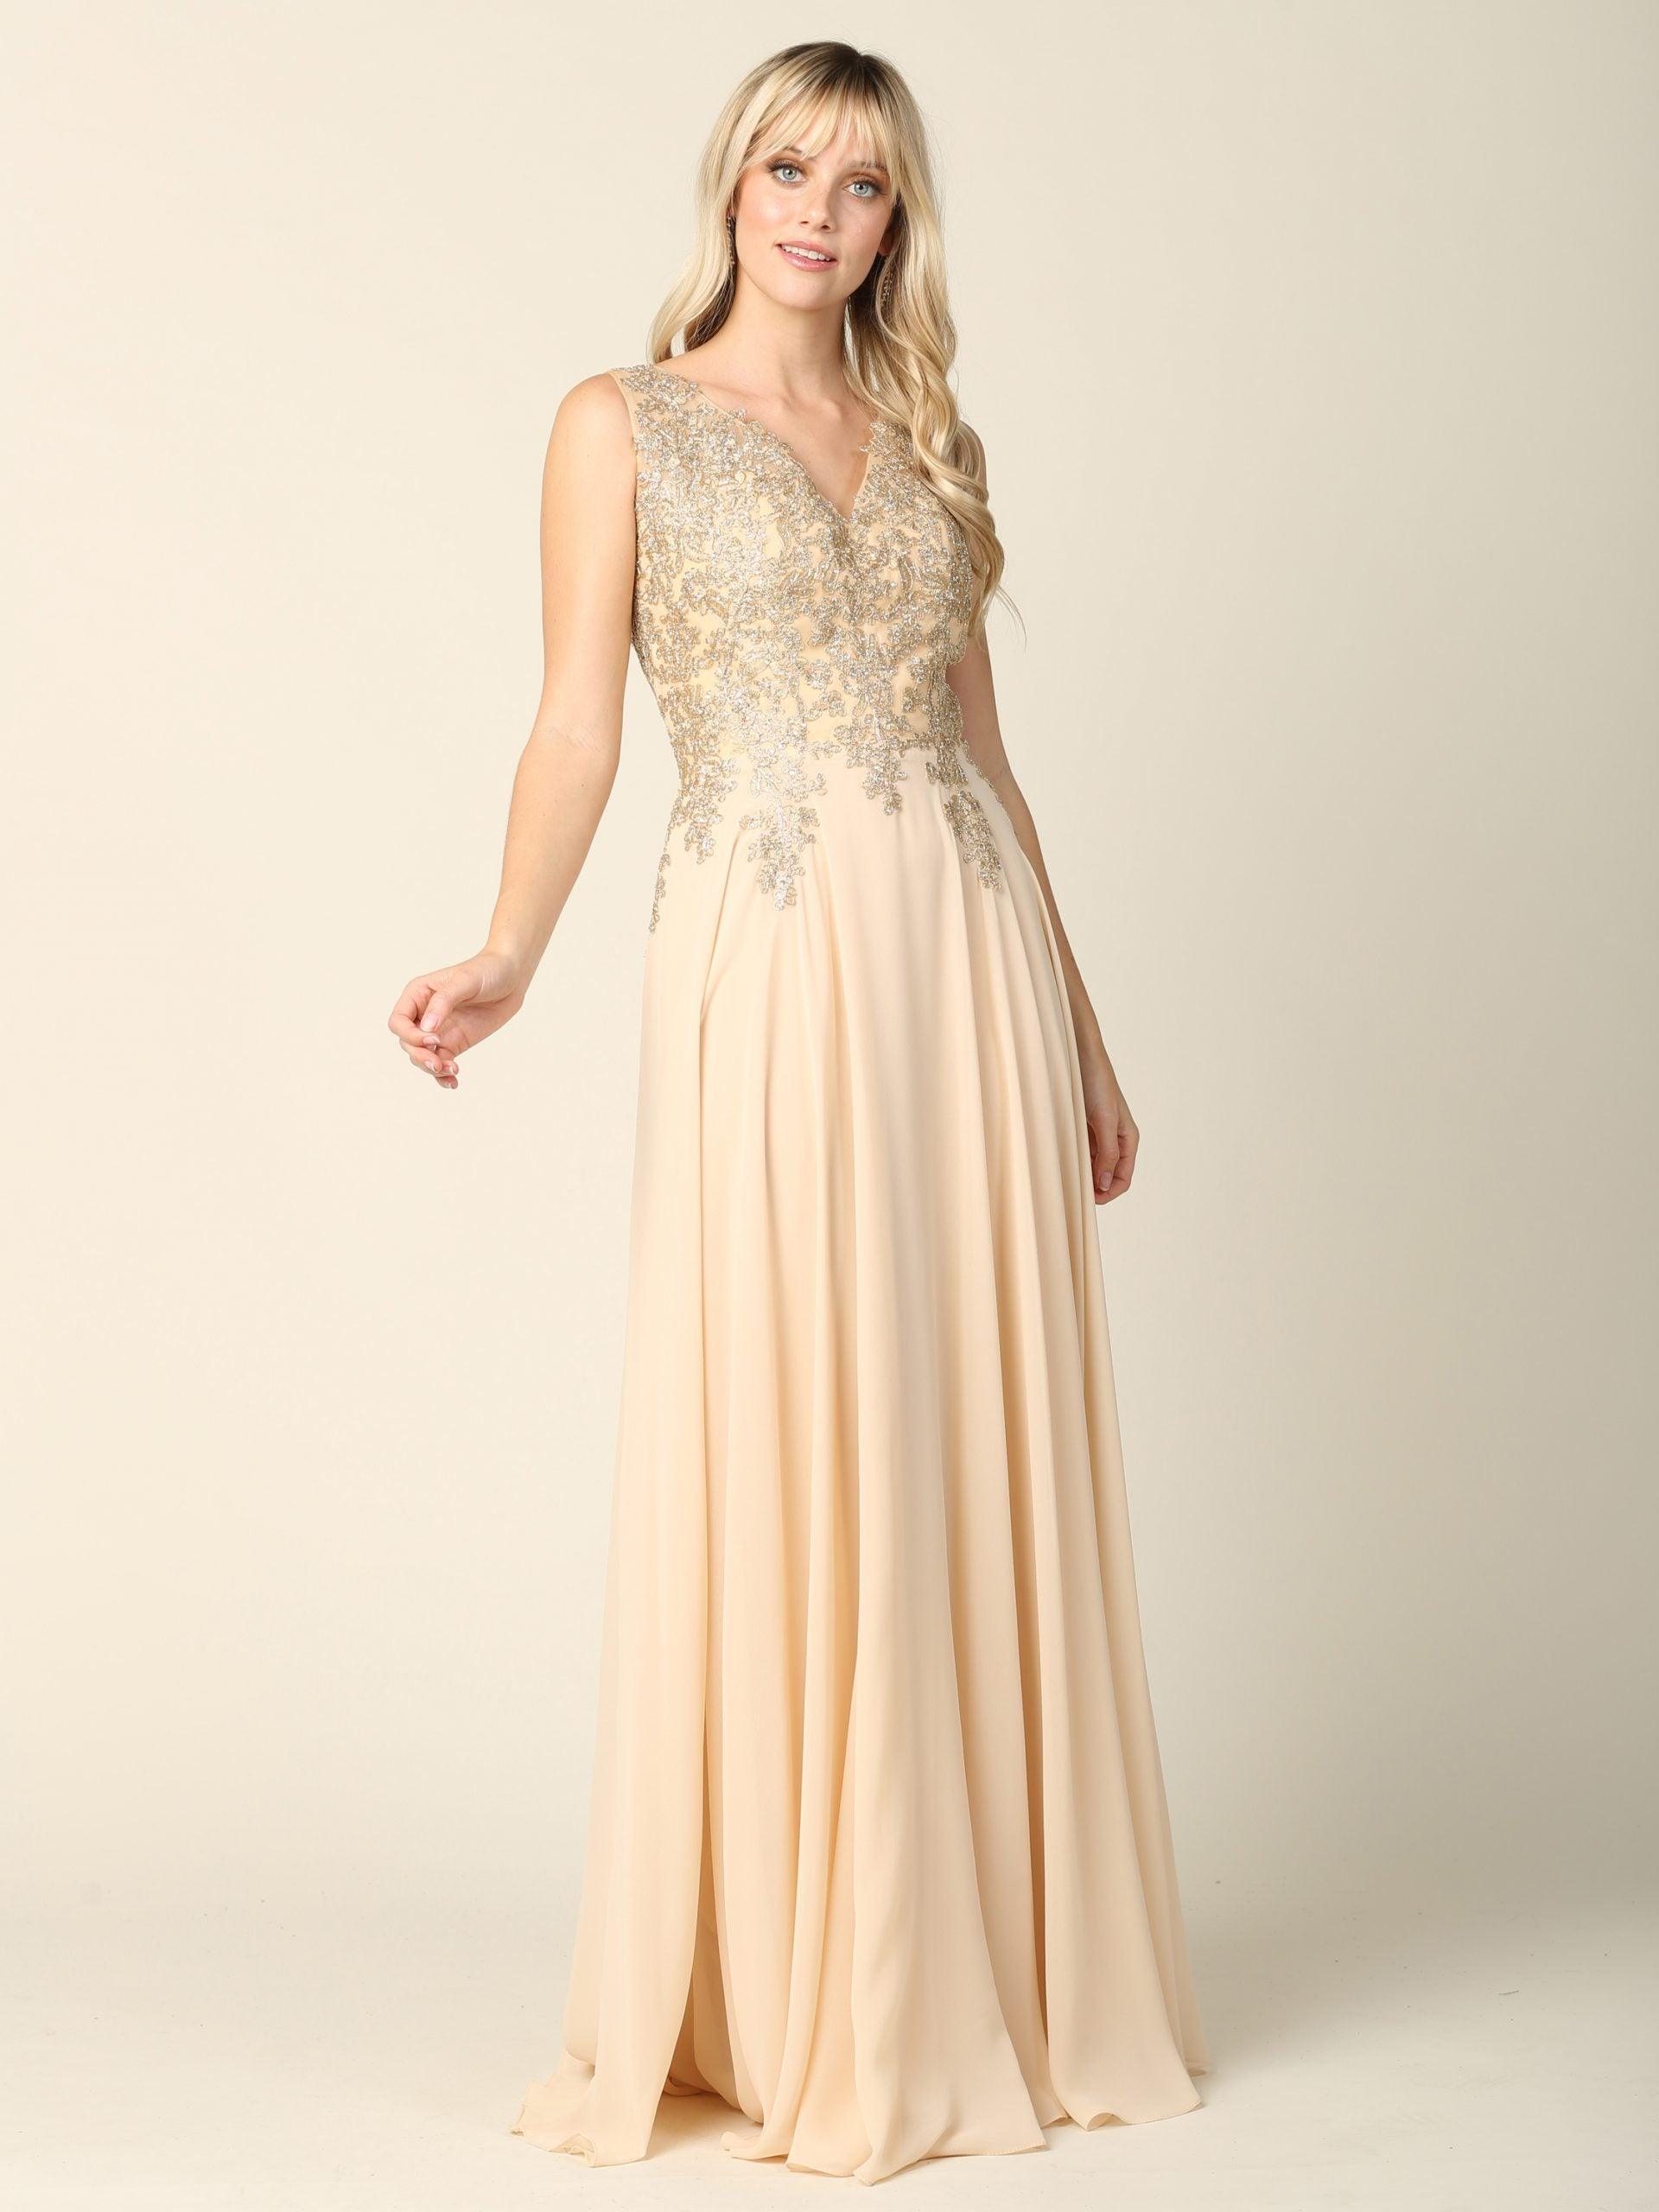 Long Mother of the Bride Chiffon Formal Dress - The Dress Outlet